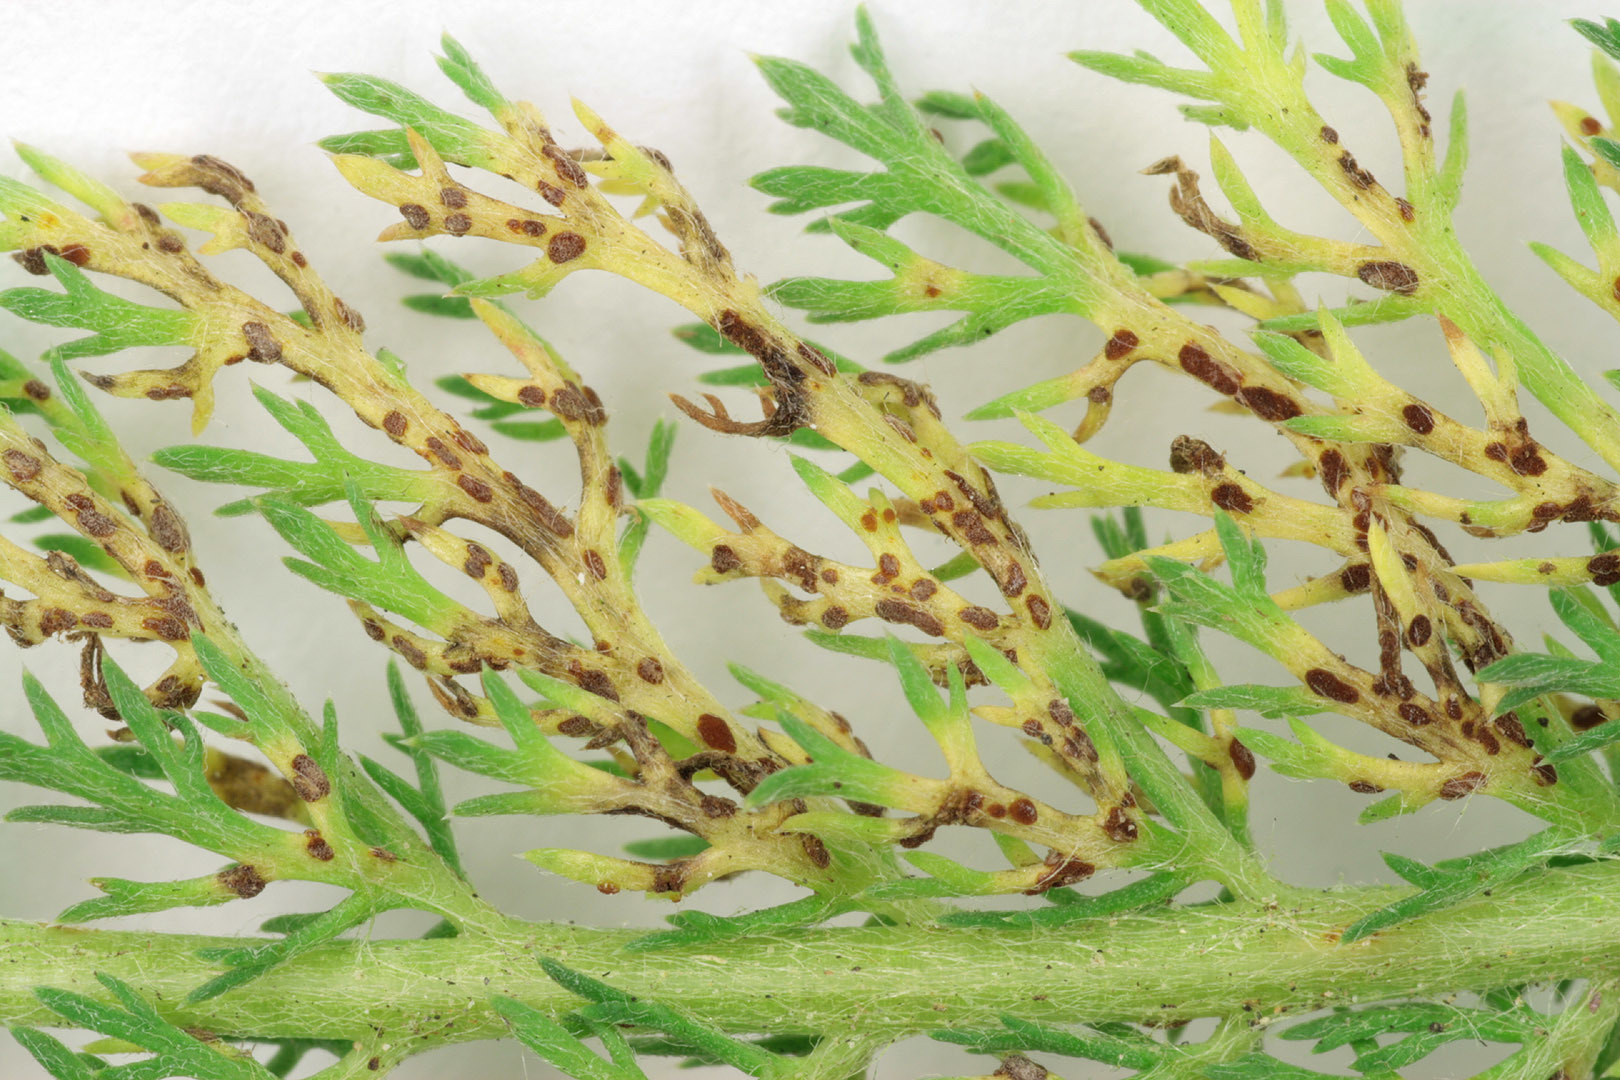 Image of Puccinia cnici-oleracei Pers. 1823